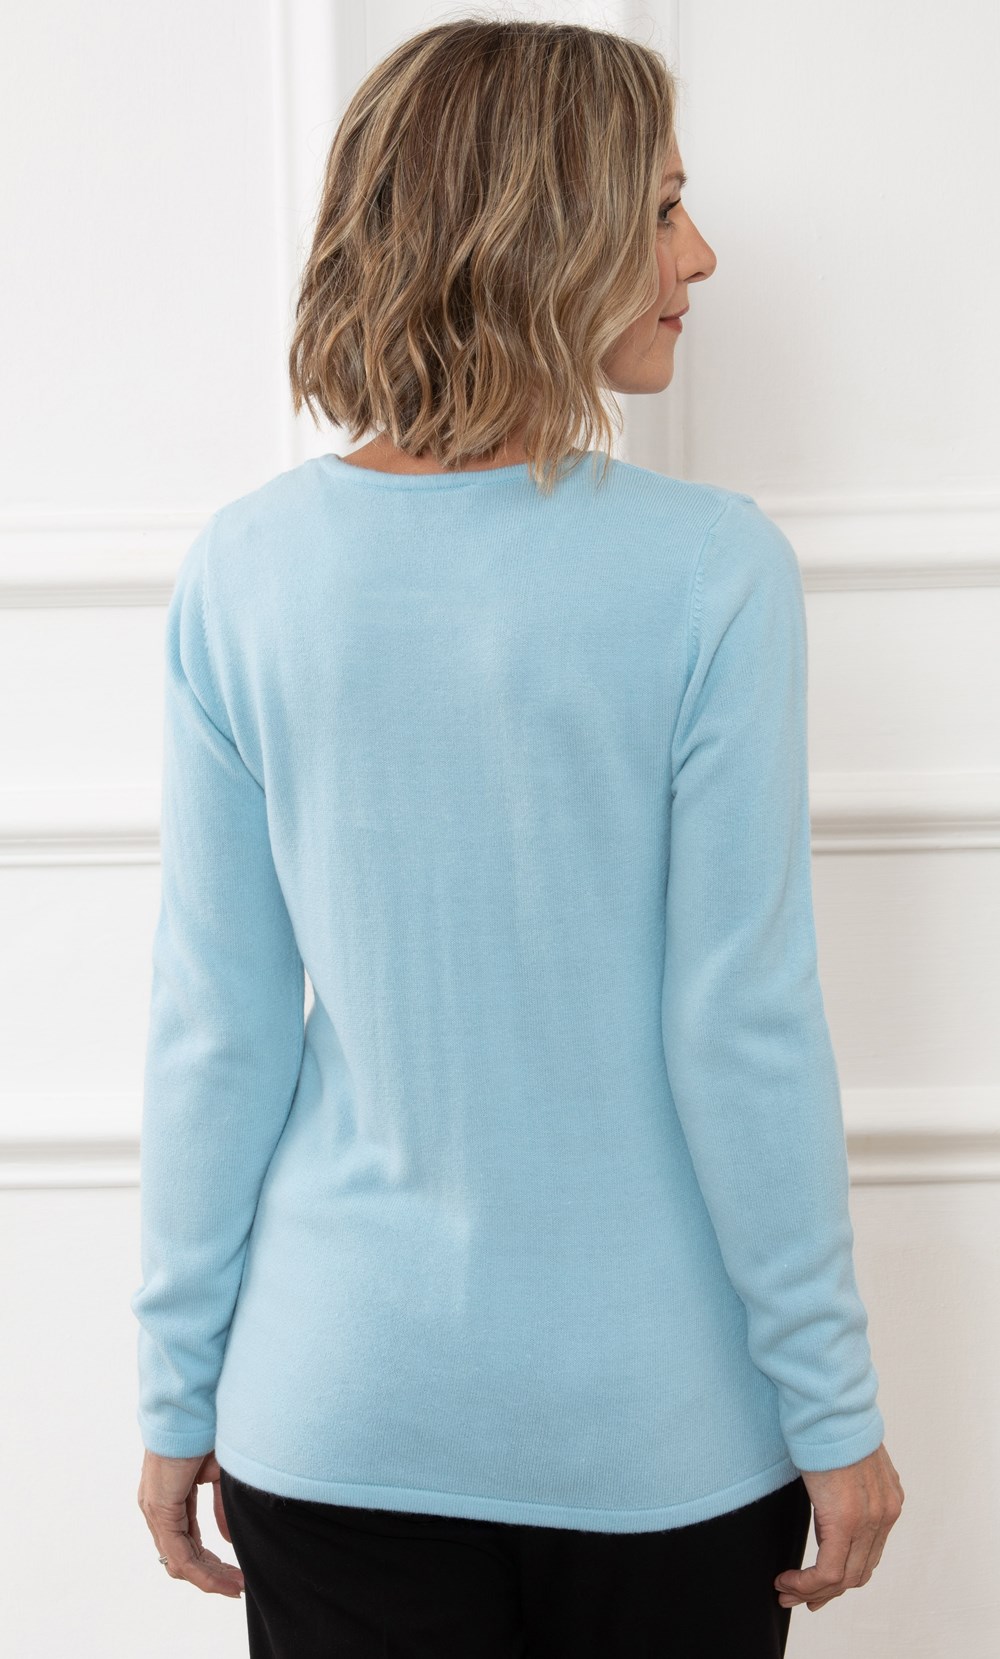 Anna Rose Embellished Cable Knit Top